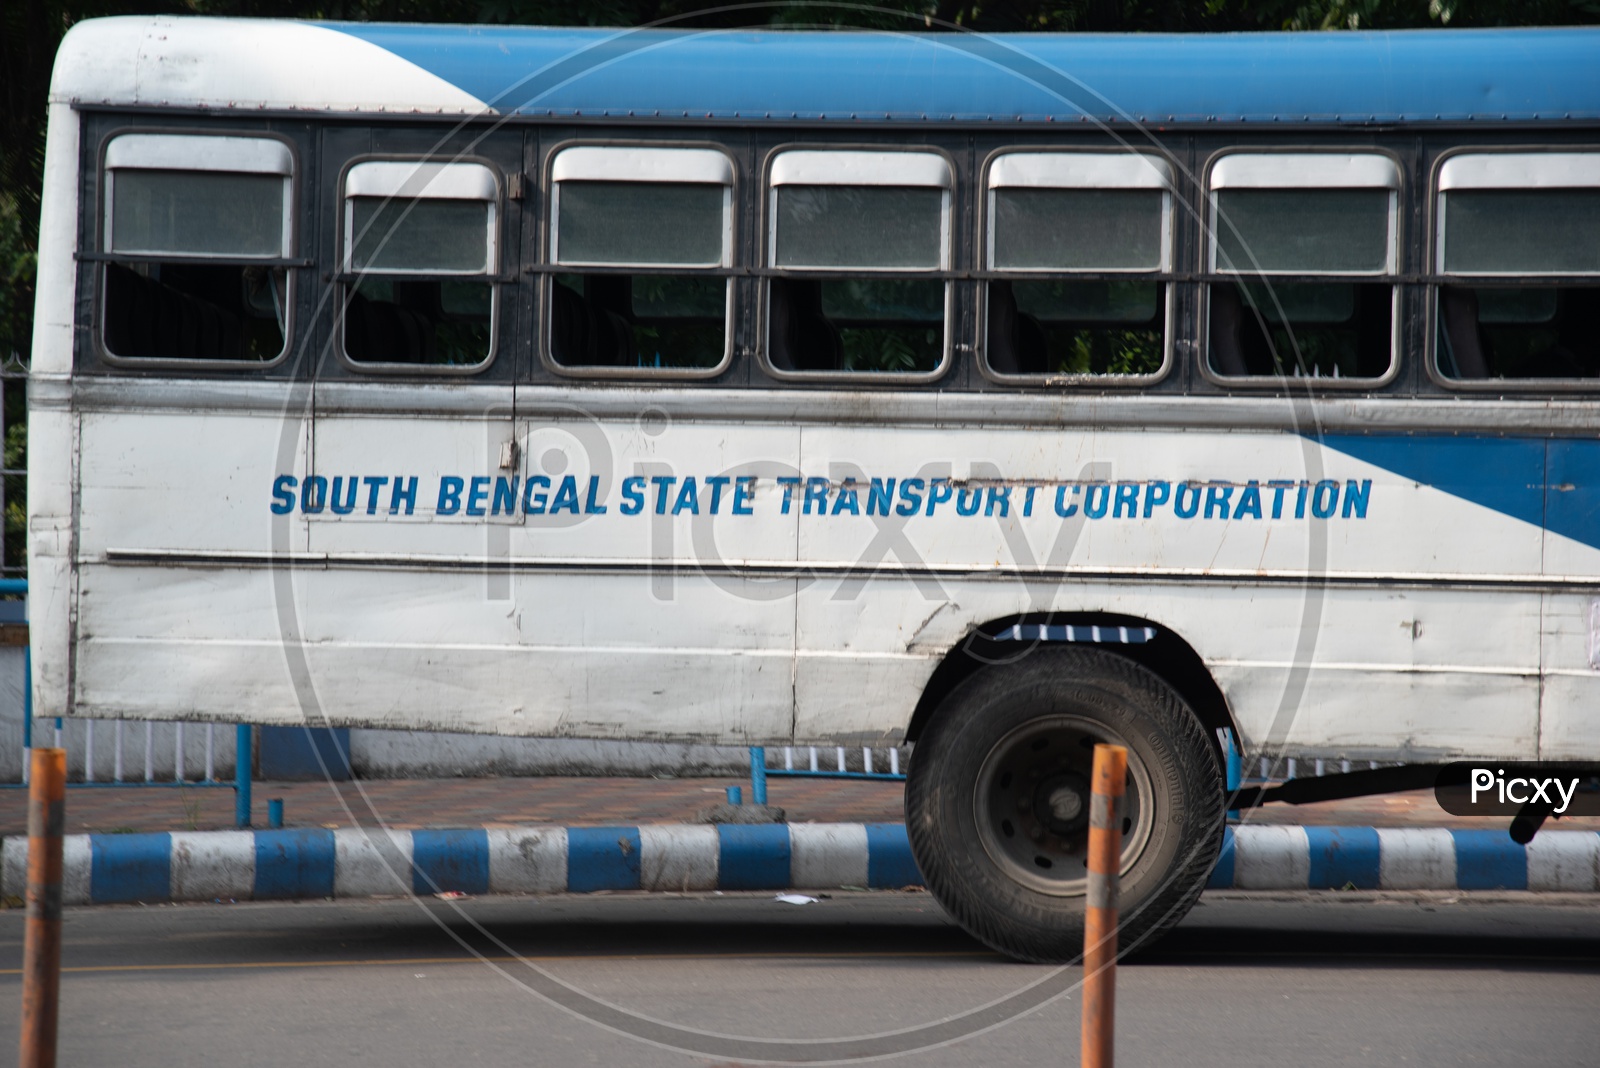 South Bengal State Transport Corporation  ( SBSTC ) Busses On the Roads Of Kolkata